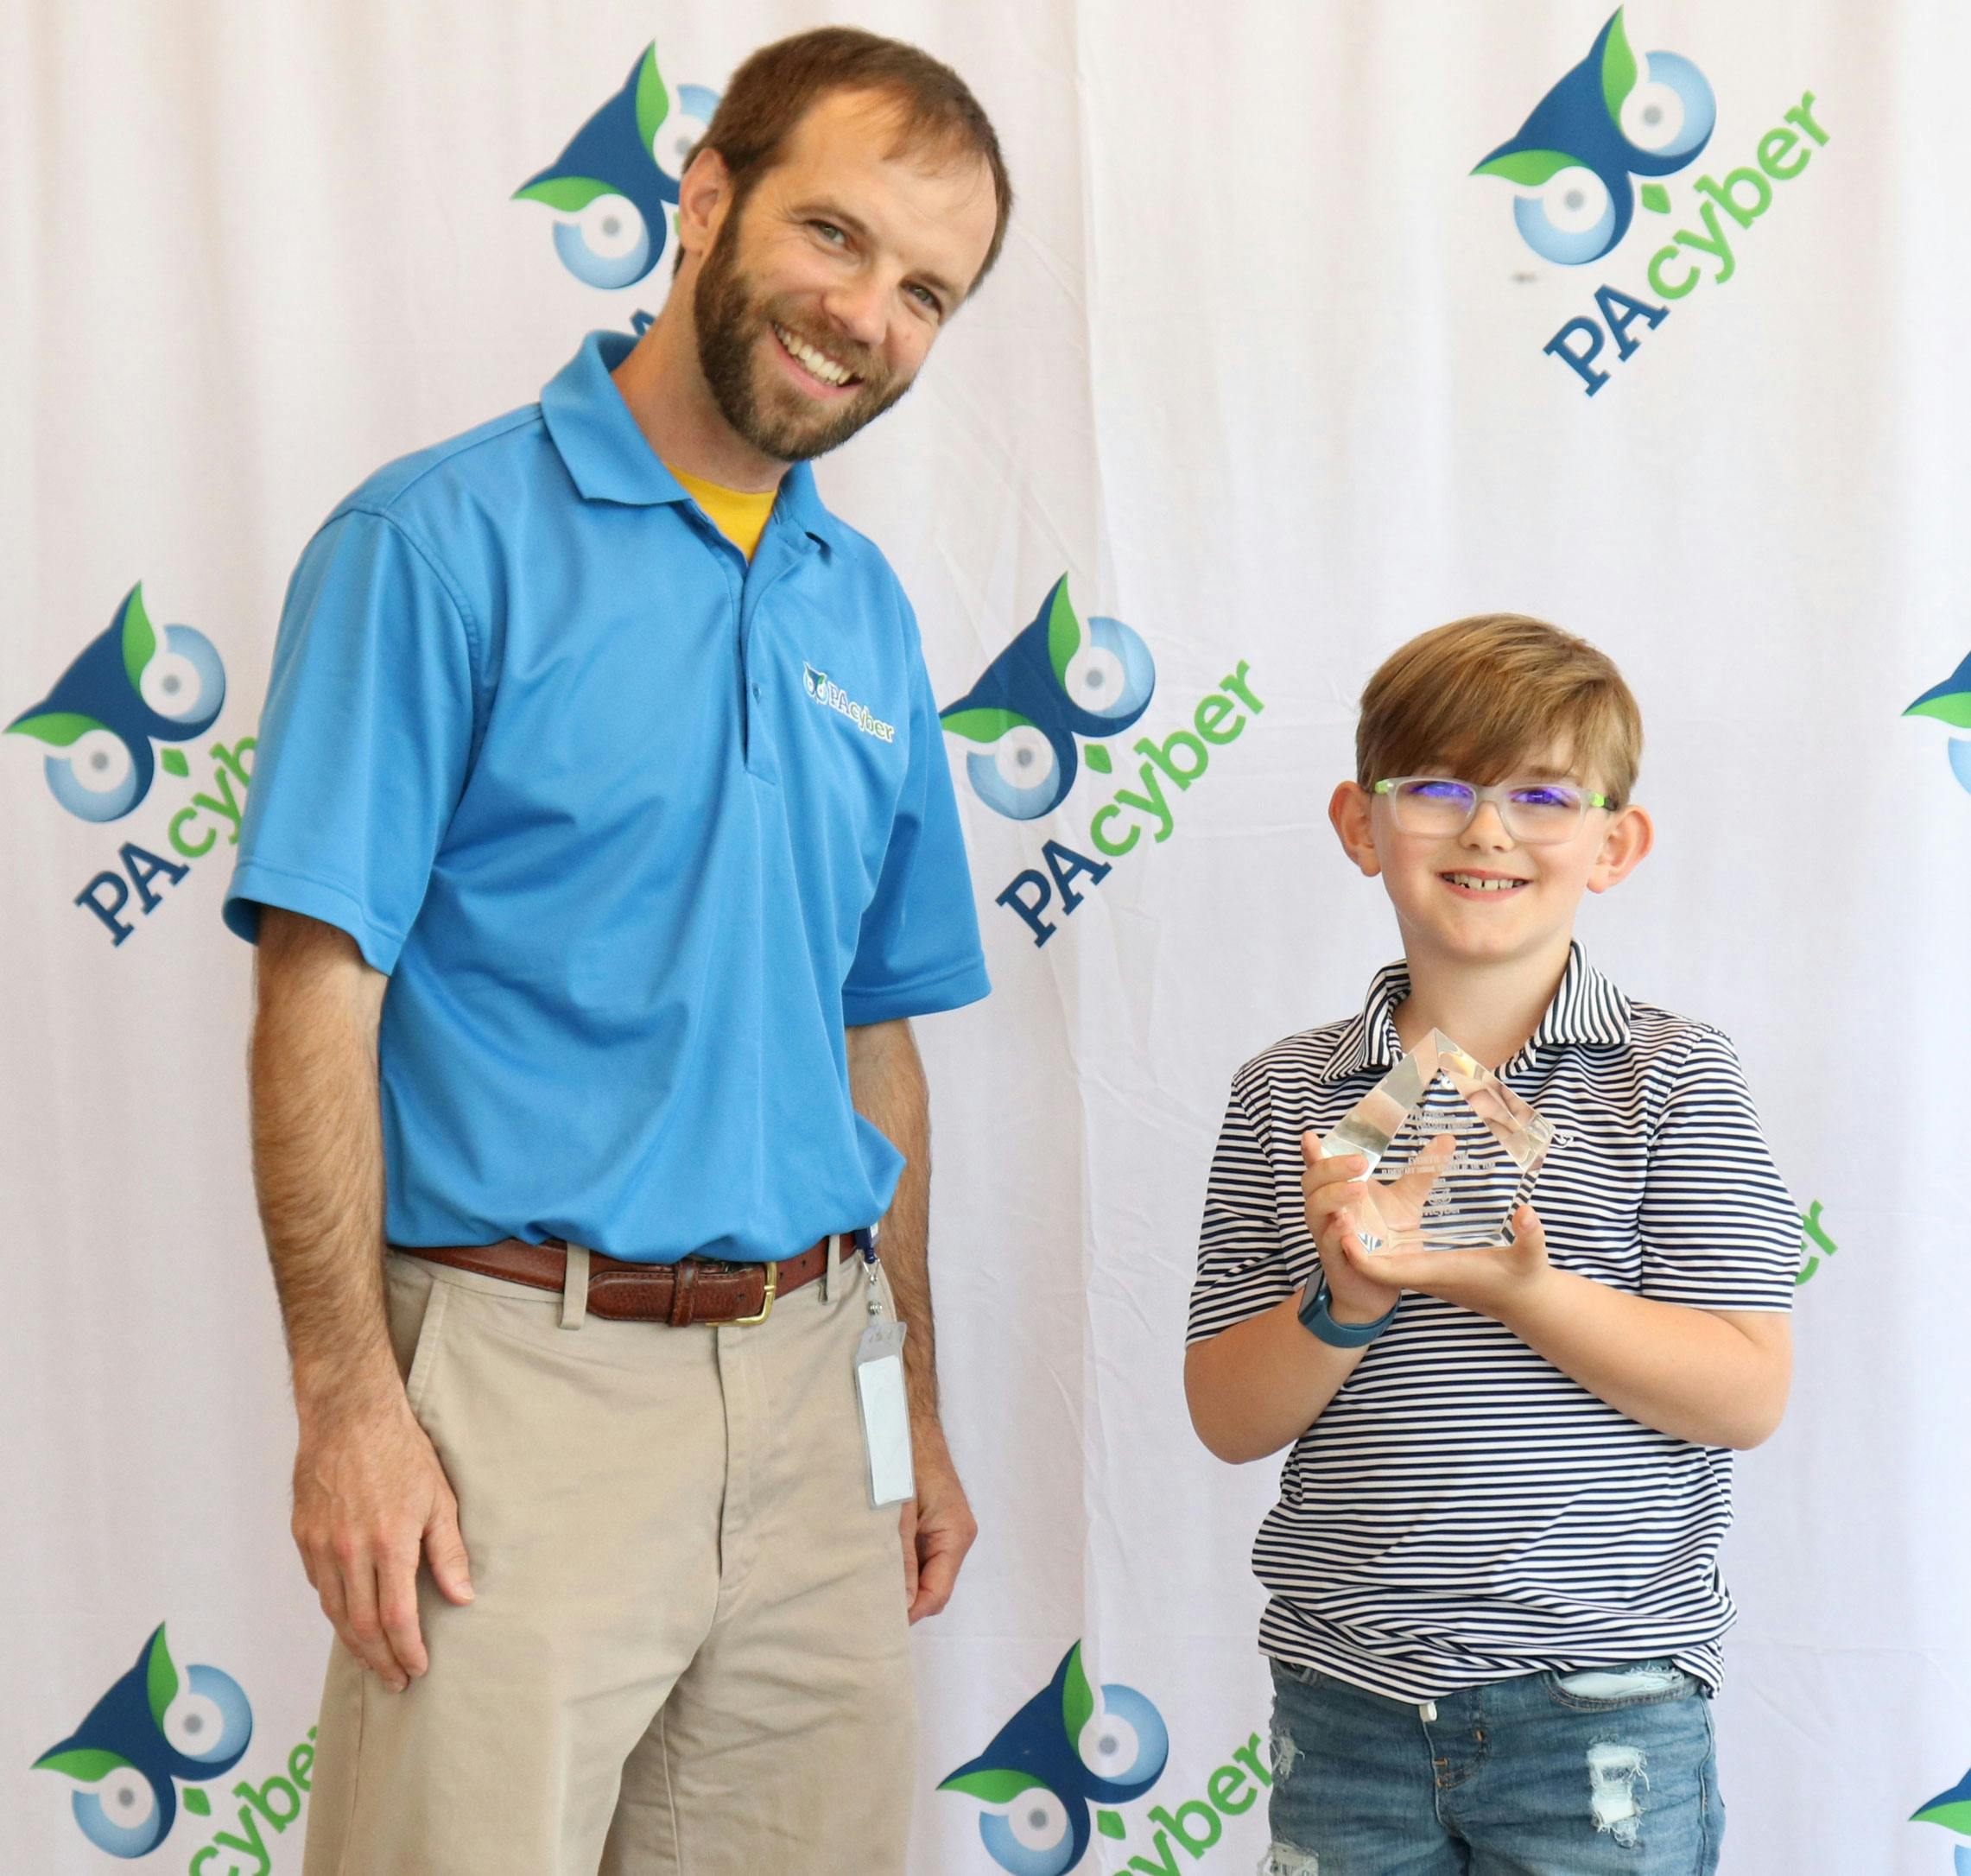 Young boy holds a pentagon-shaped glass award in front of a backdrop with the PA Cyber logo. A man with a PA Cyber-branded shirt stands next to him.